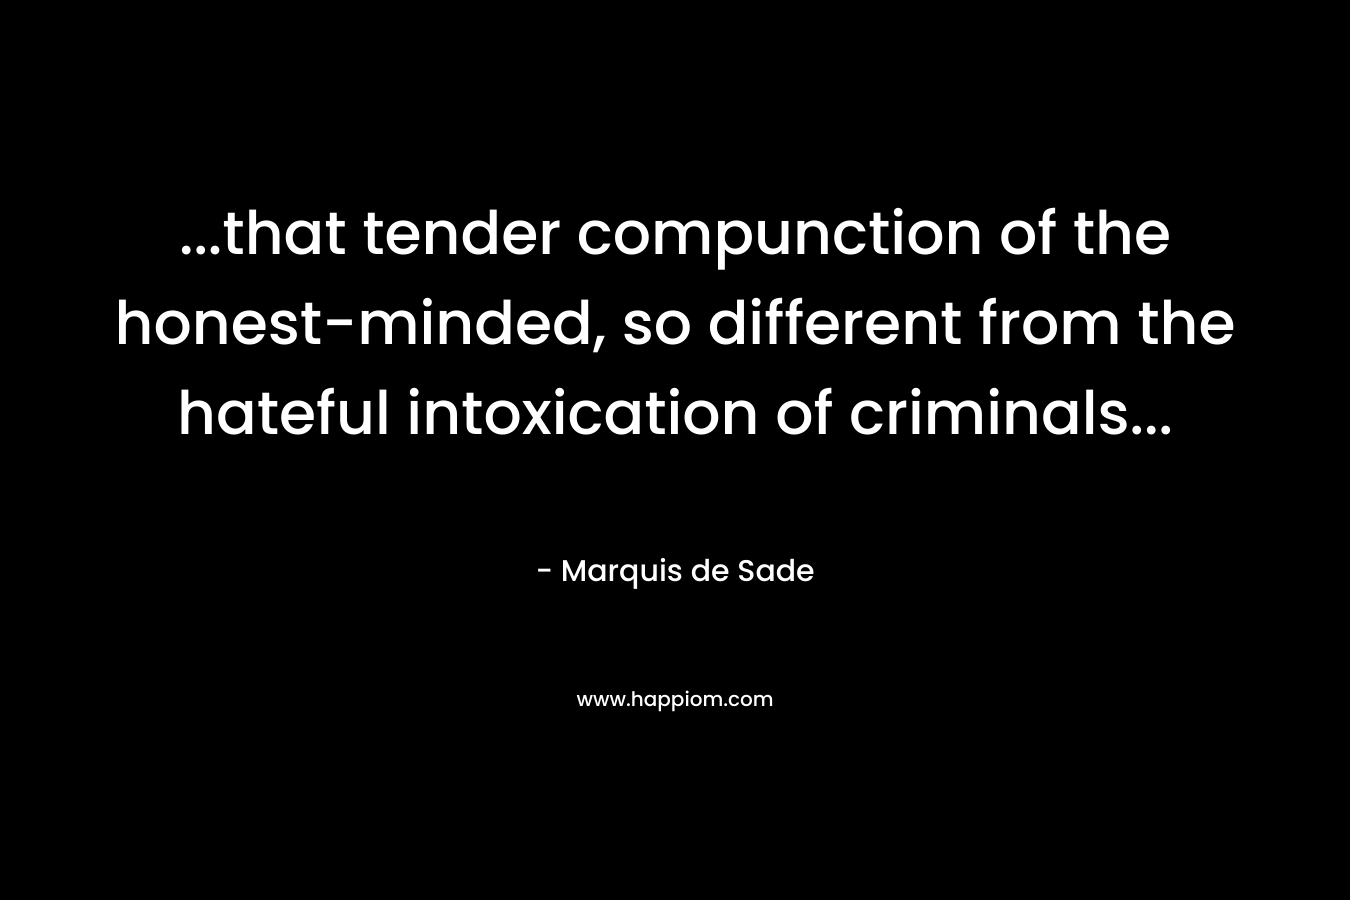 ...that tender compunction of the honest-minded, so different from the hateful intoxication of criminals...